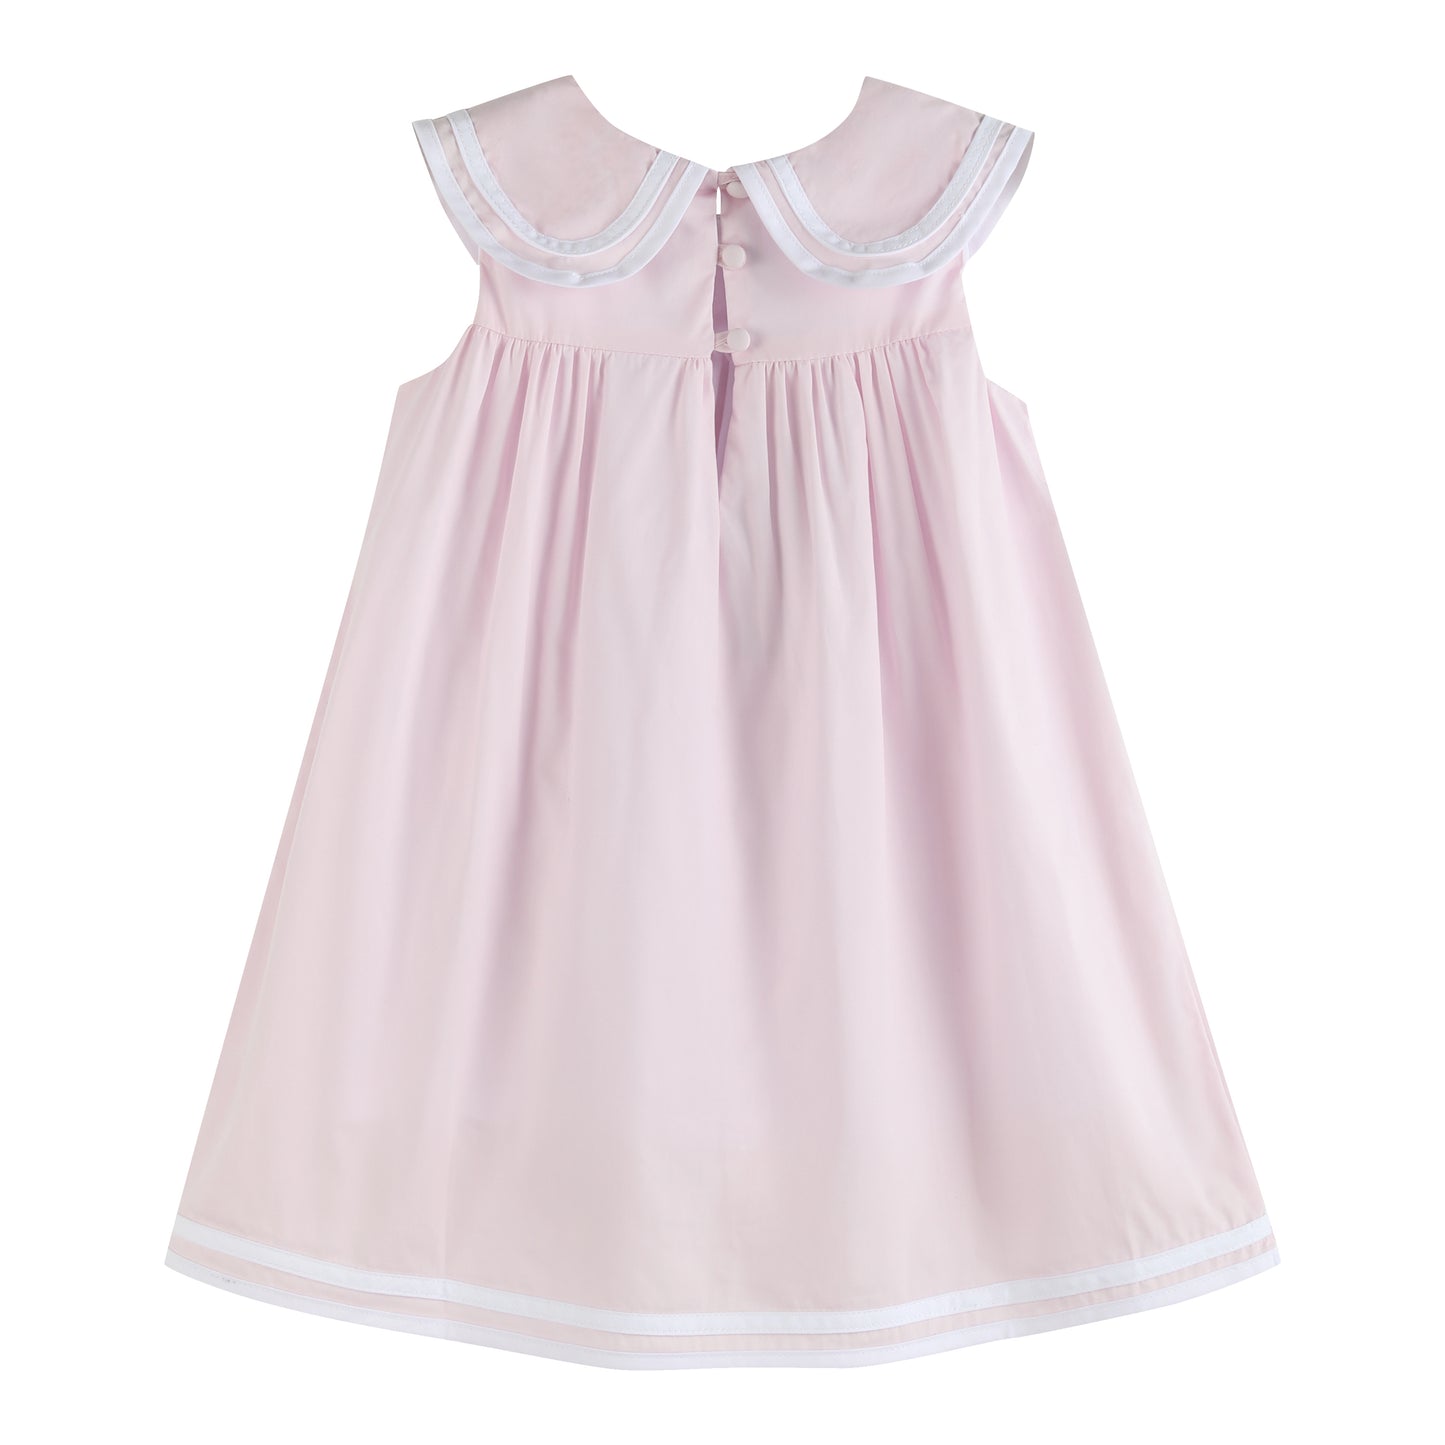 Pink Swing Dress with Bow